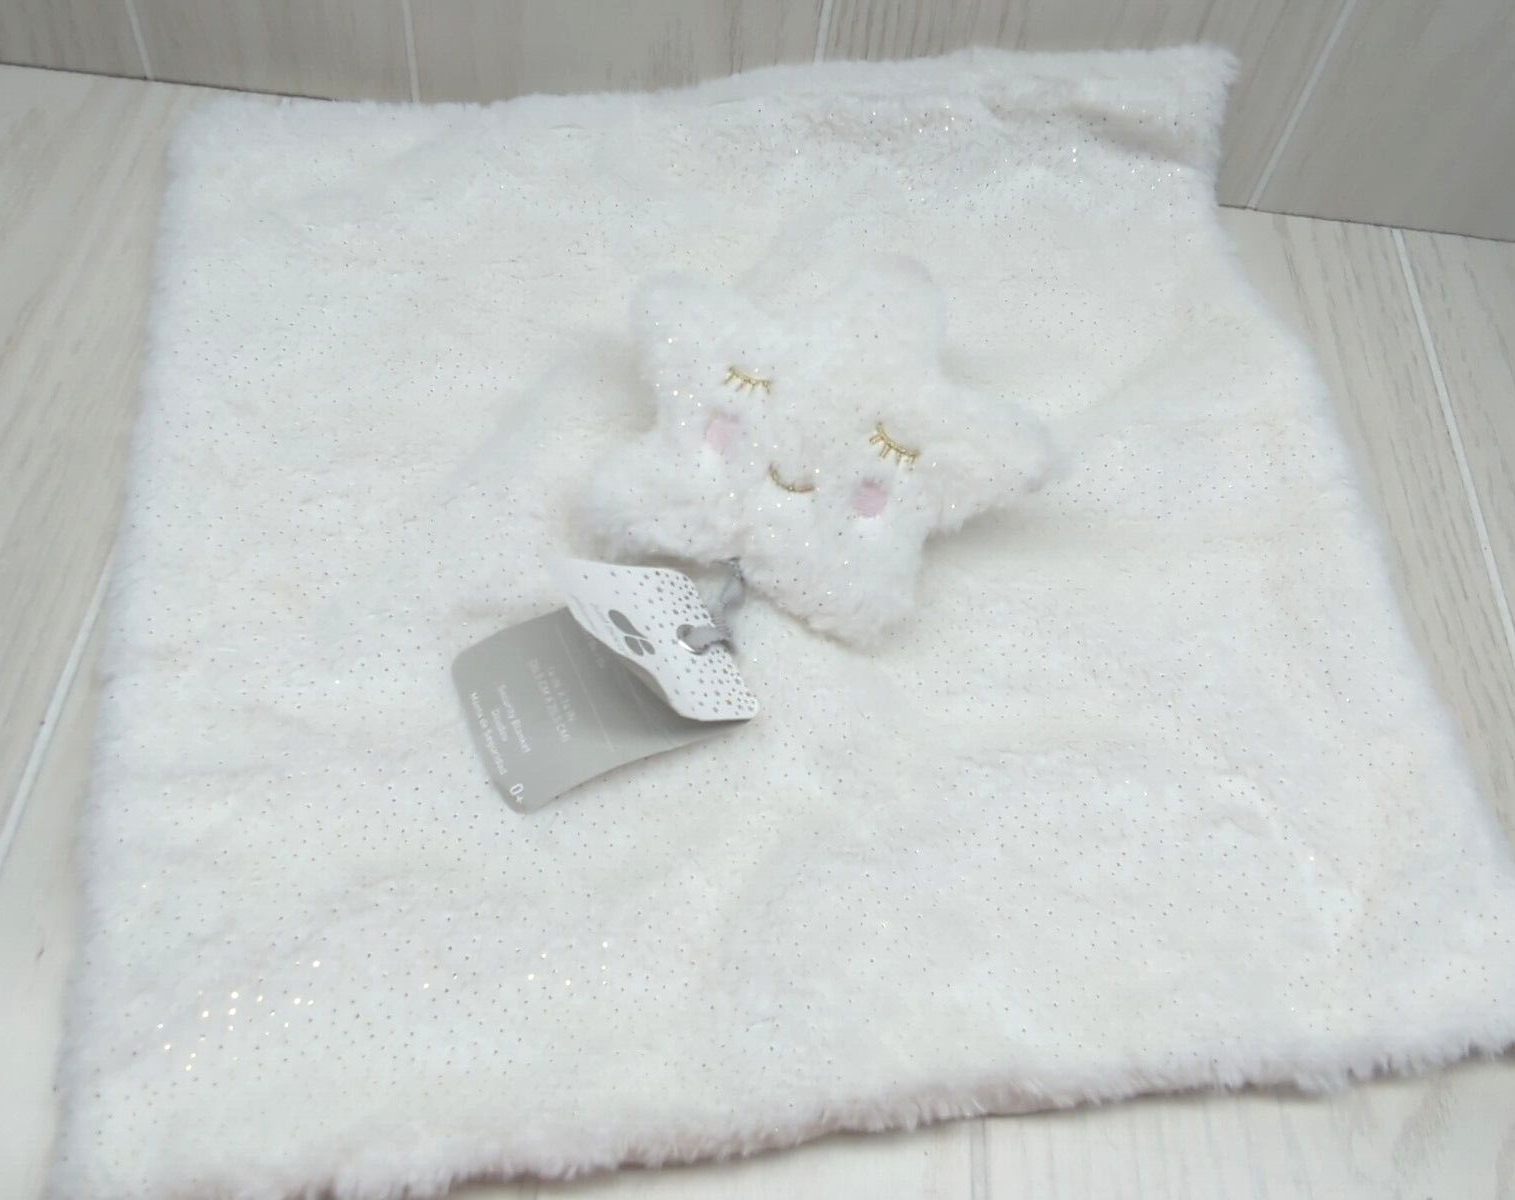 Just Born white sleeping star gold sparkles Security Blanket baby lovey - $51.97